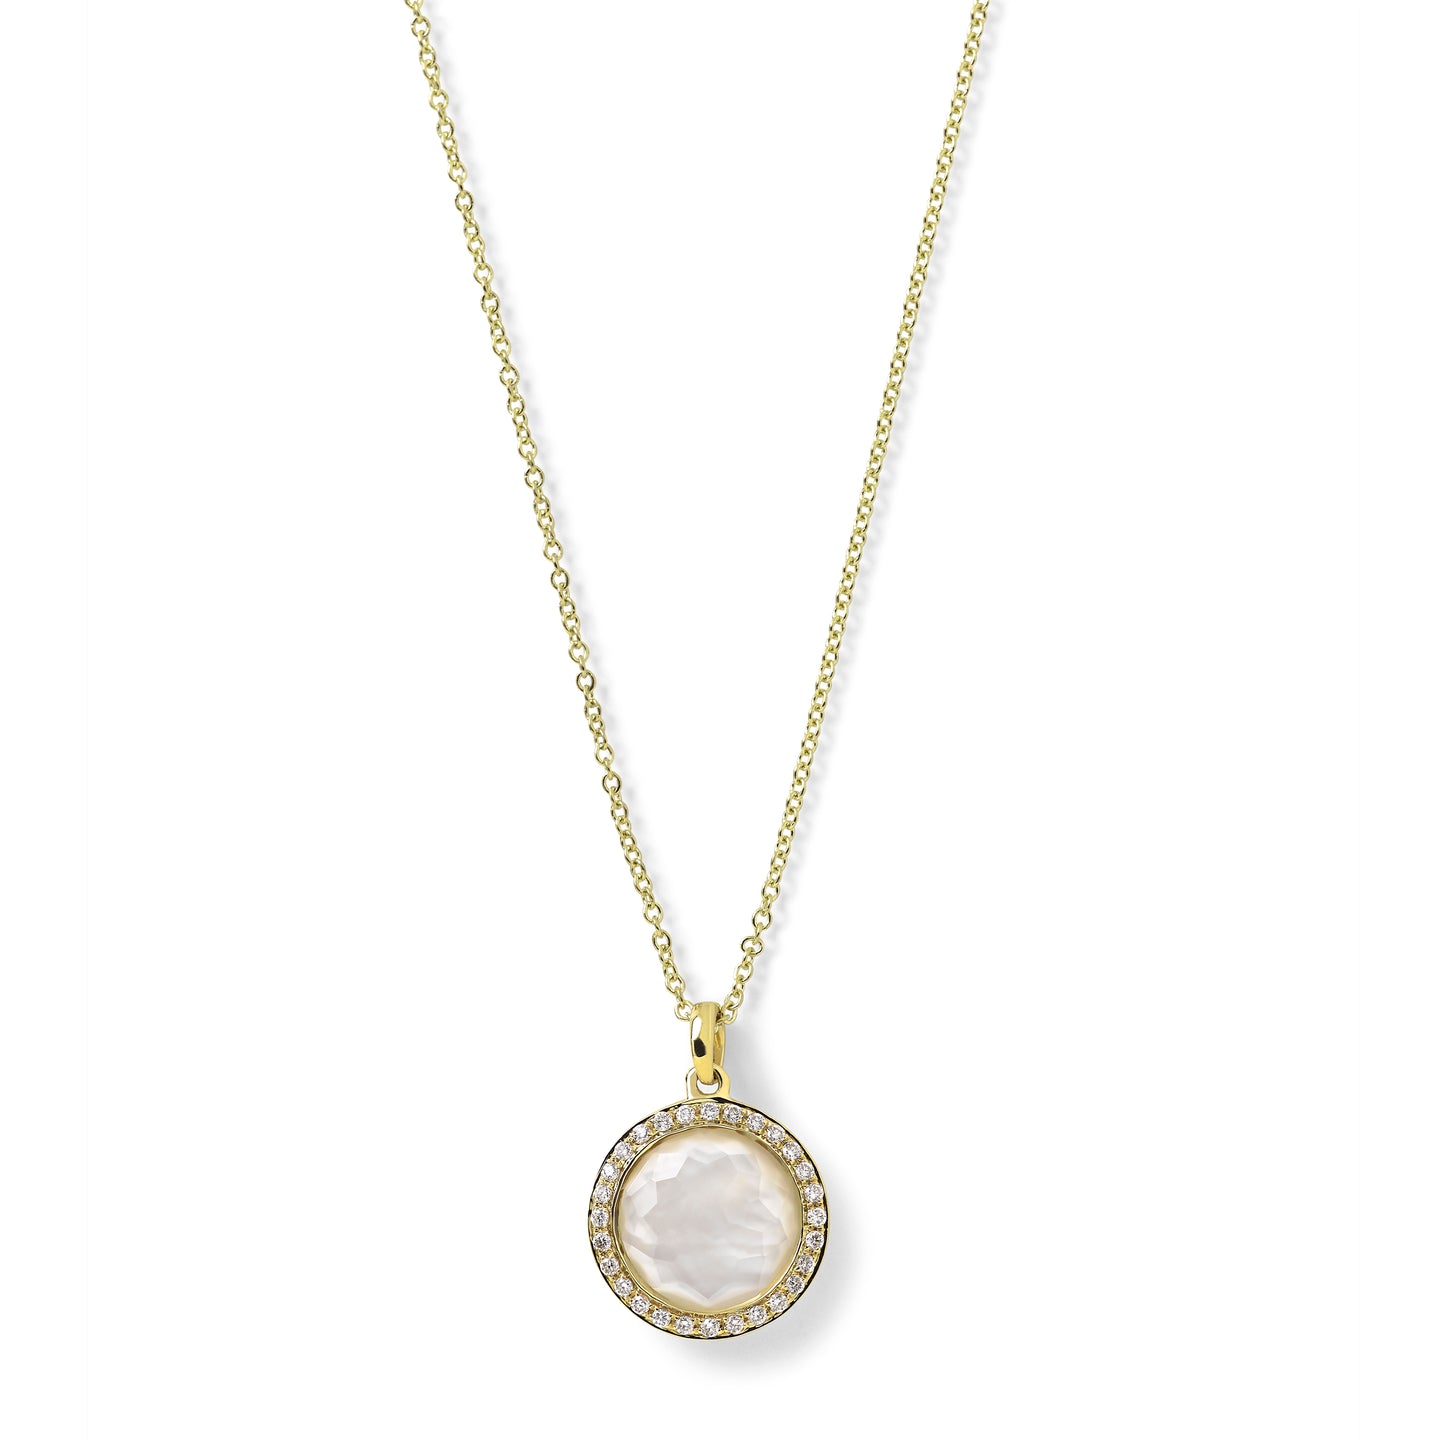 IPPOLITA Rock Candy Lollipop Mini Pendant Necklace with Diamonds in Mother-of-Pearl